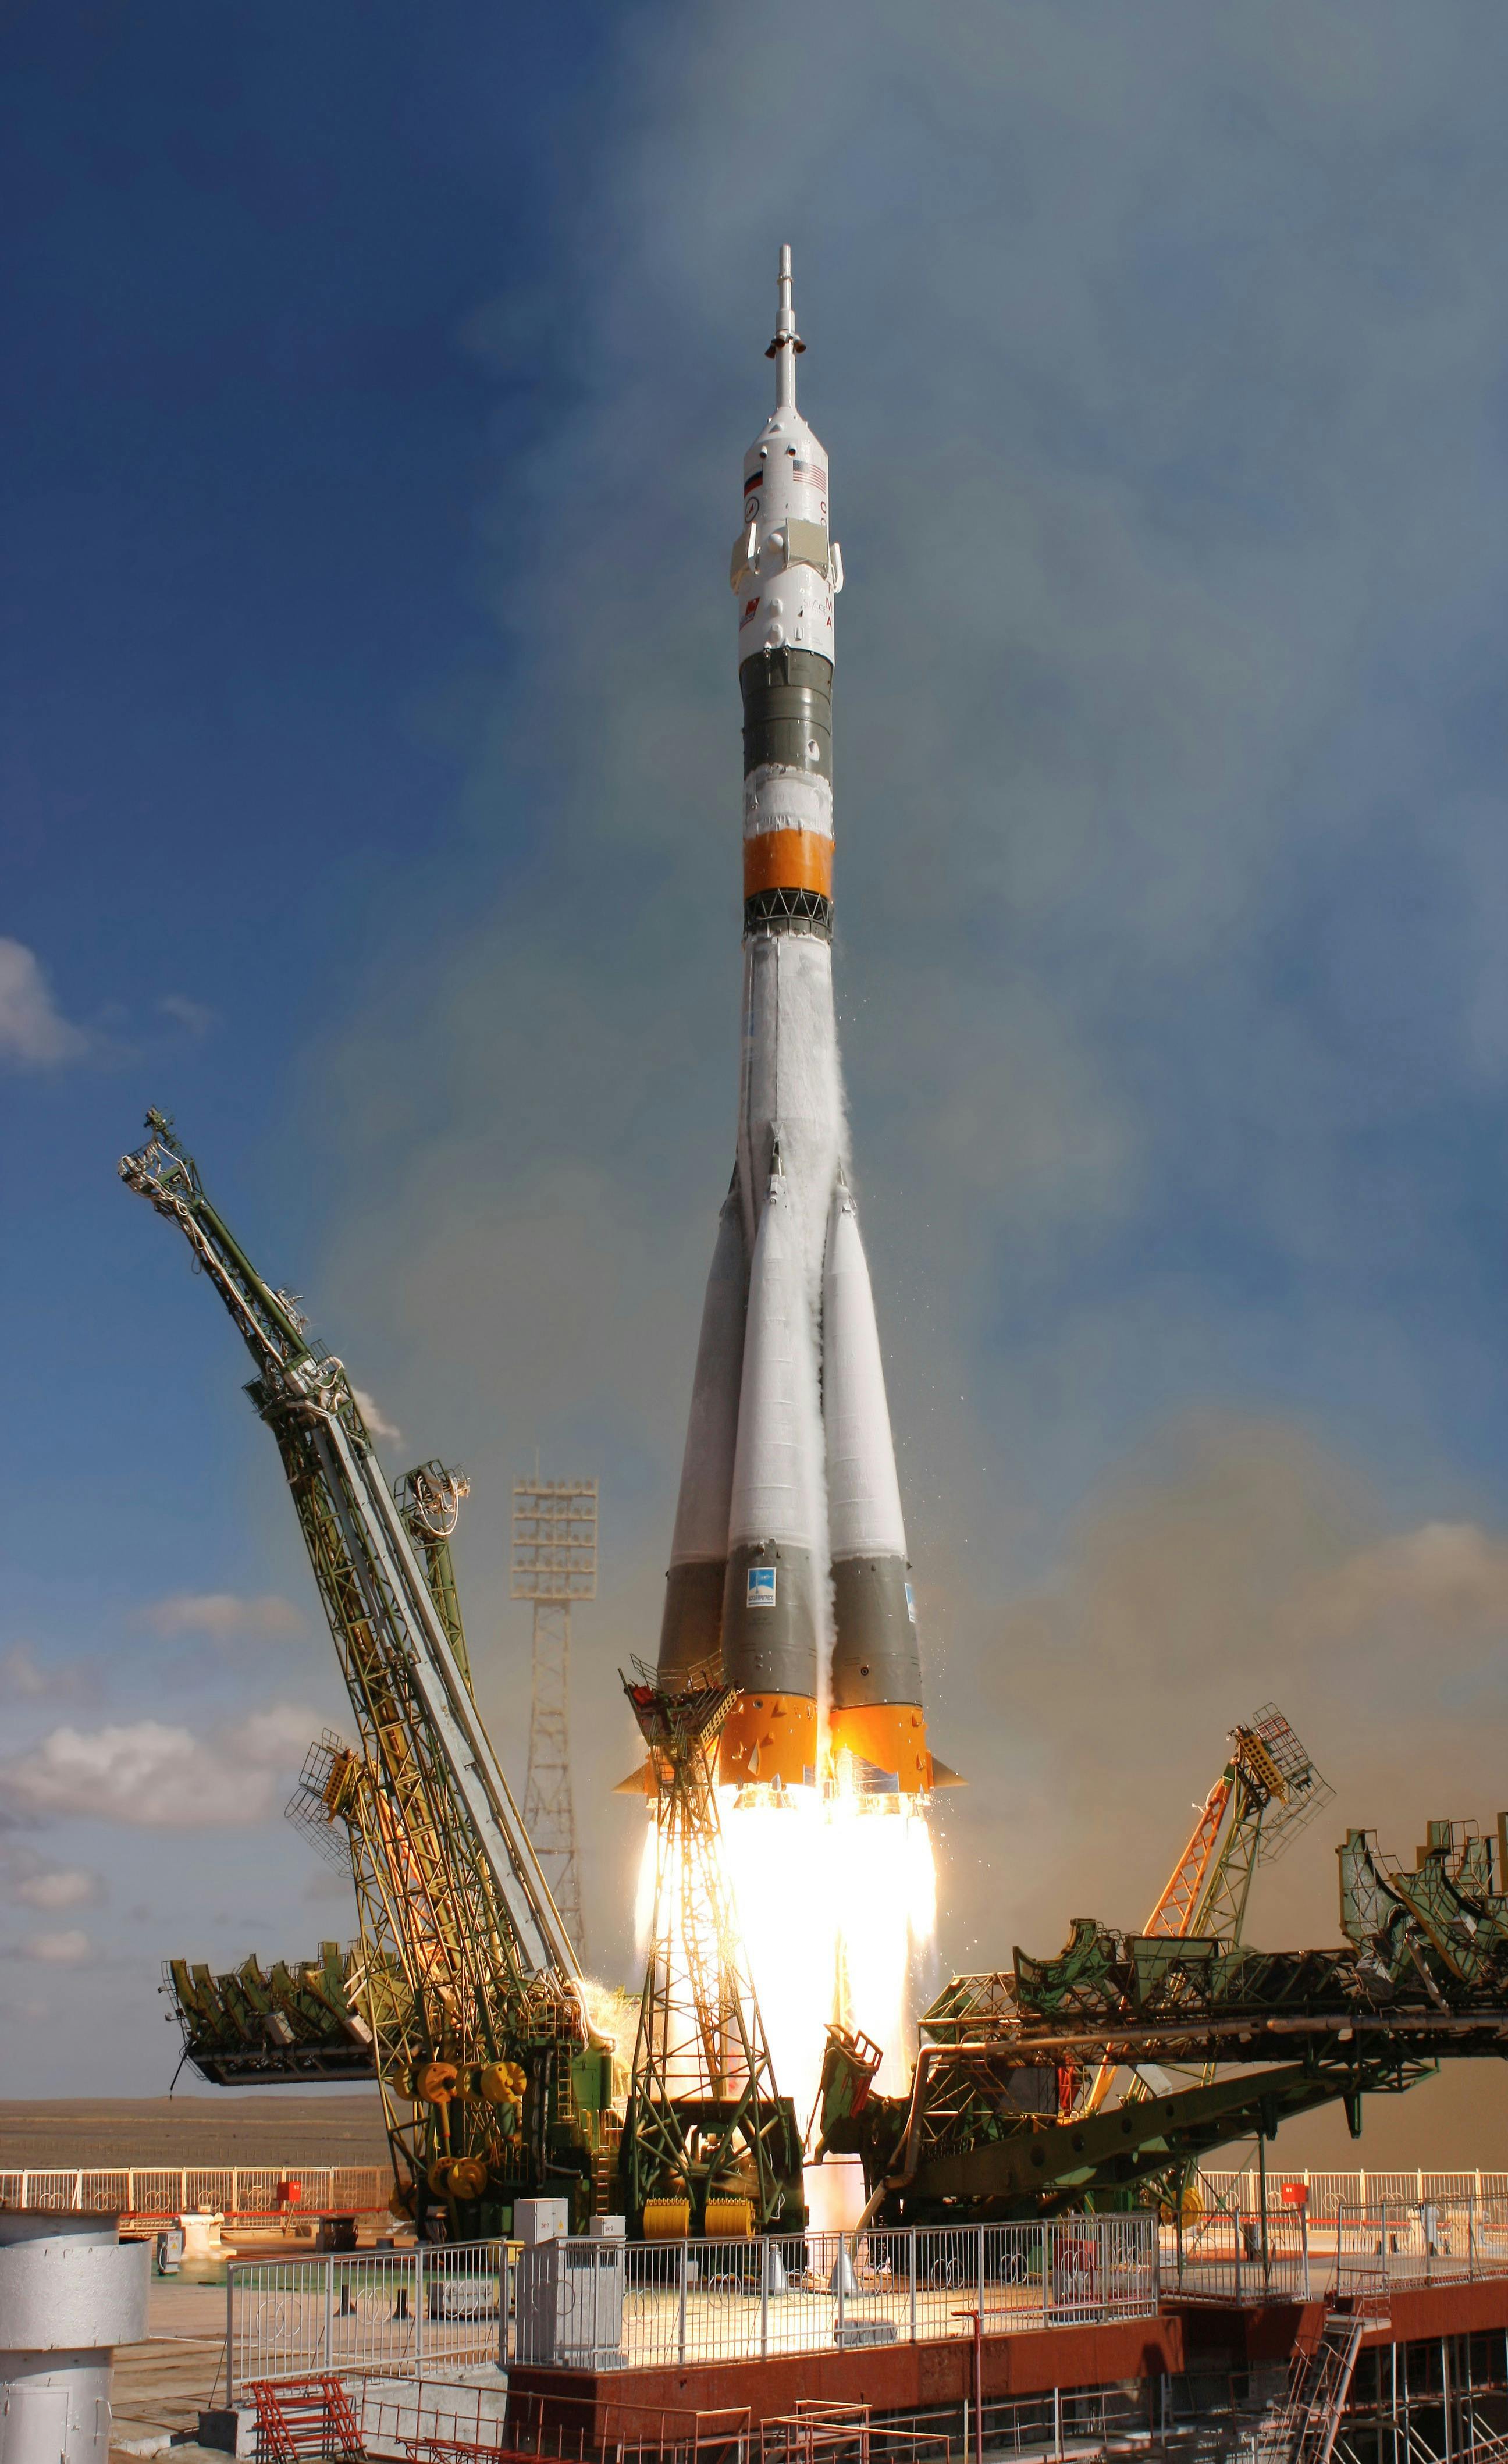 Rocket Photos, Download The BEST Free Rocket Stock Photos & HD Images